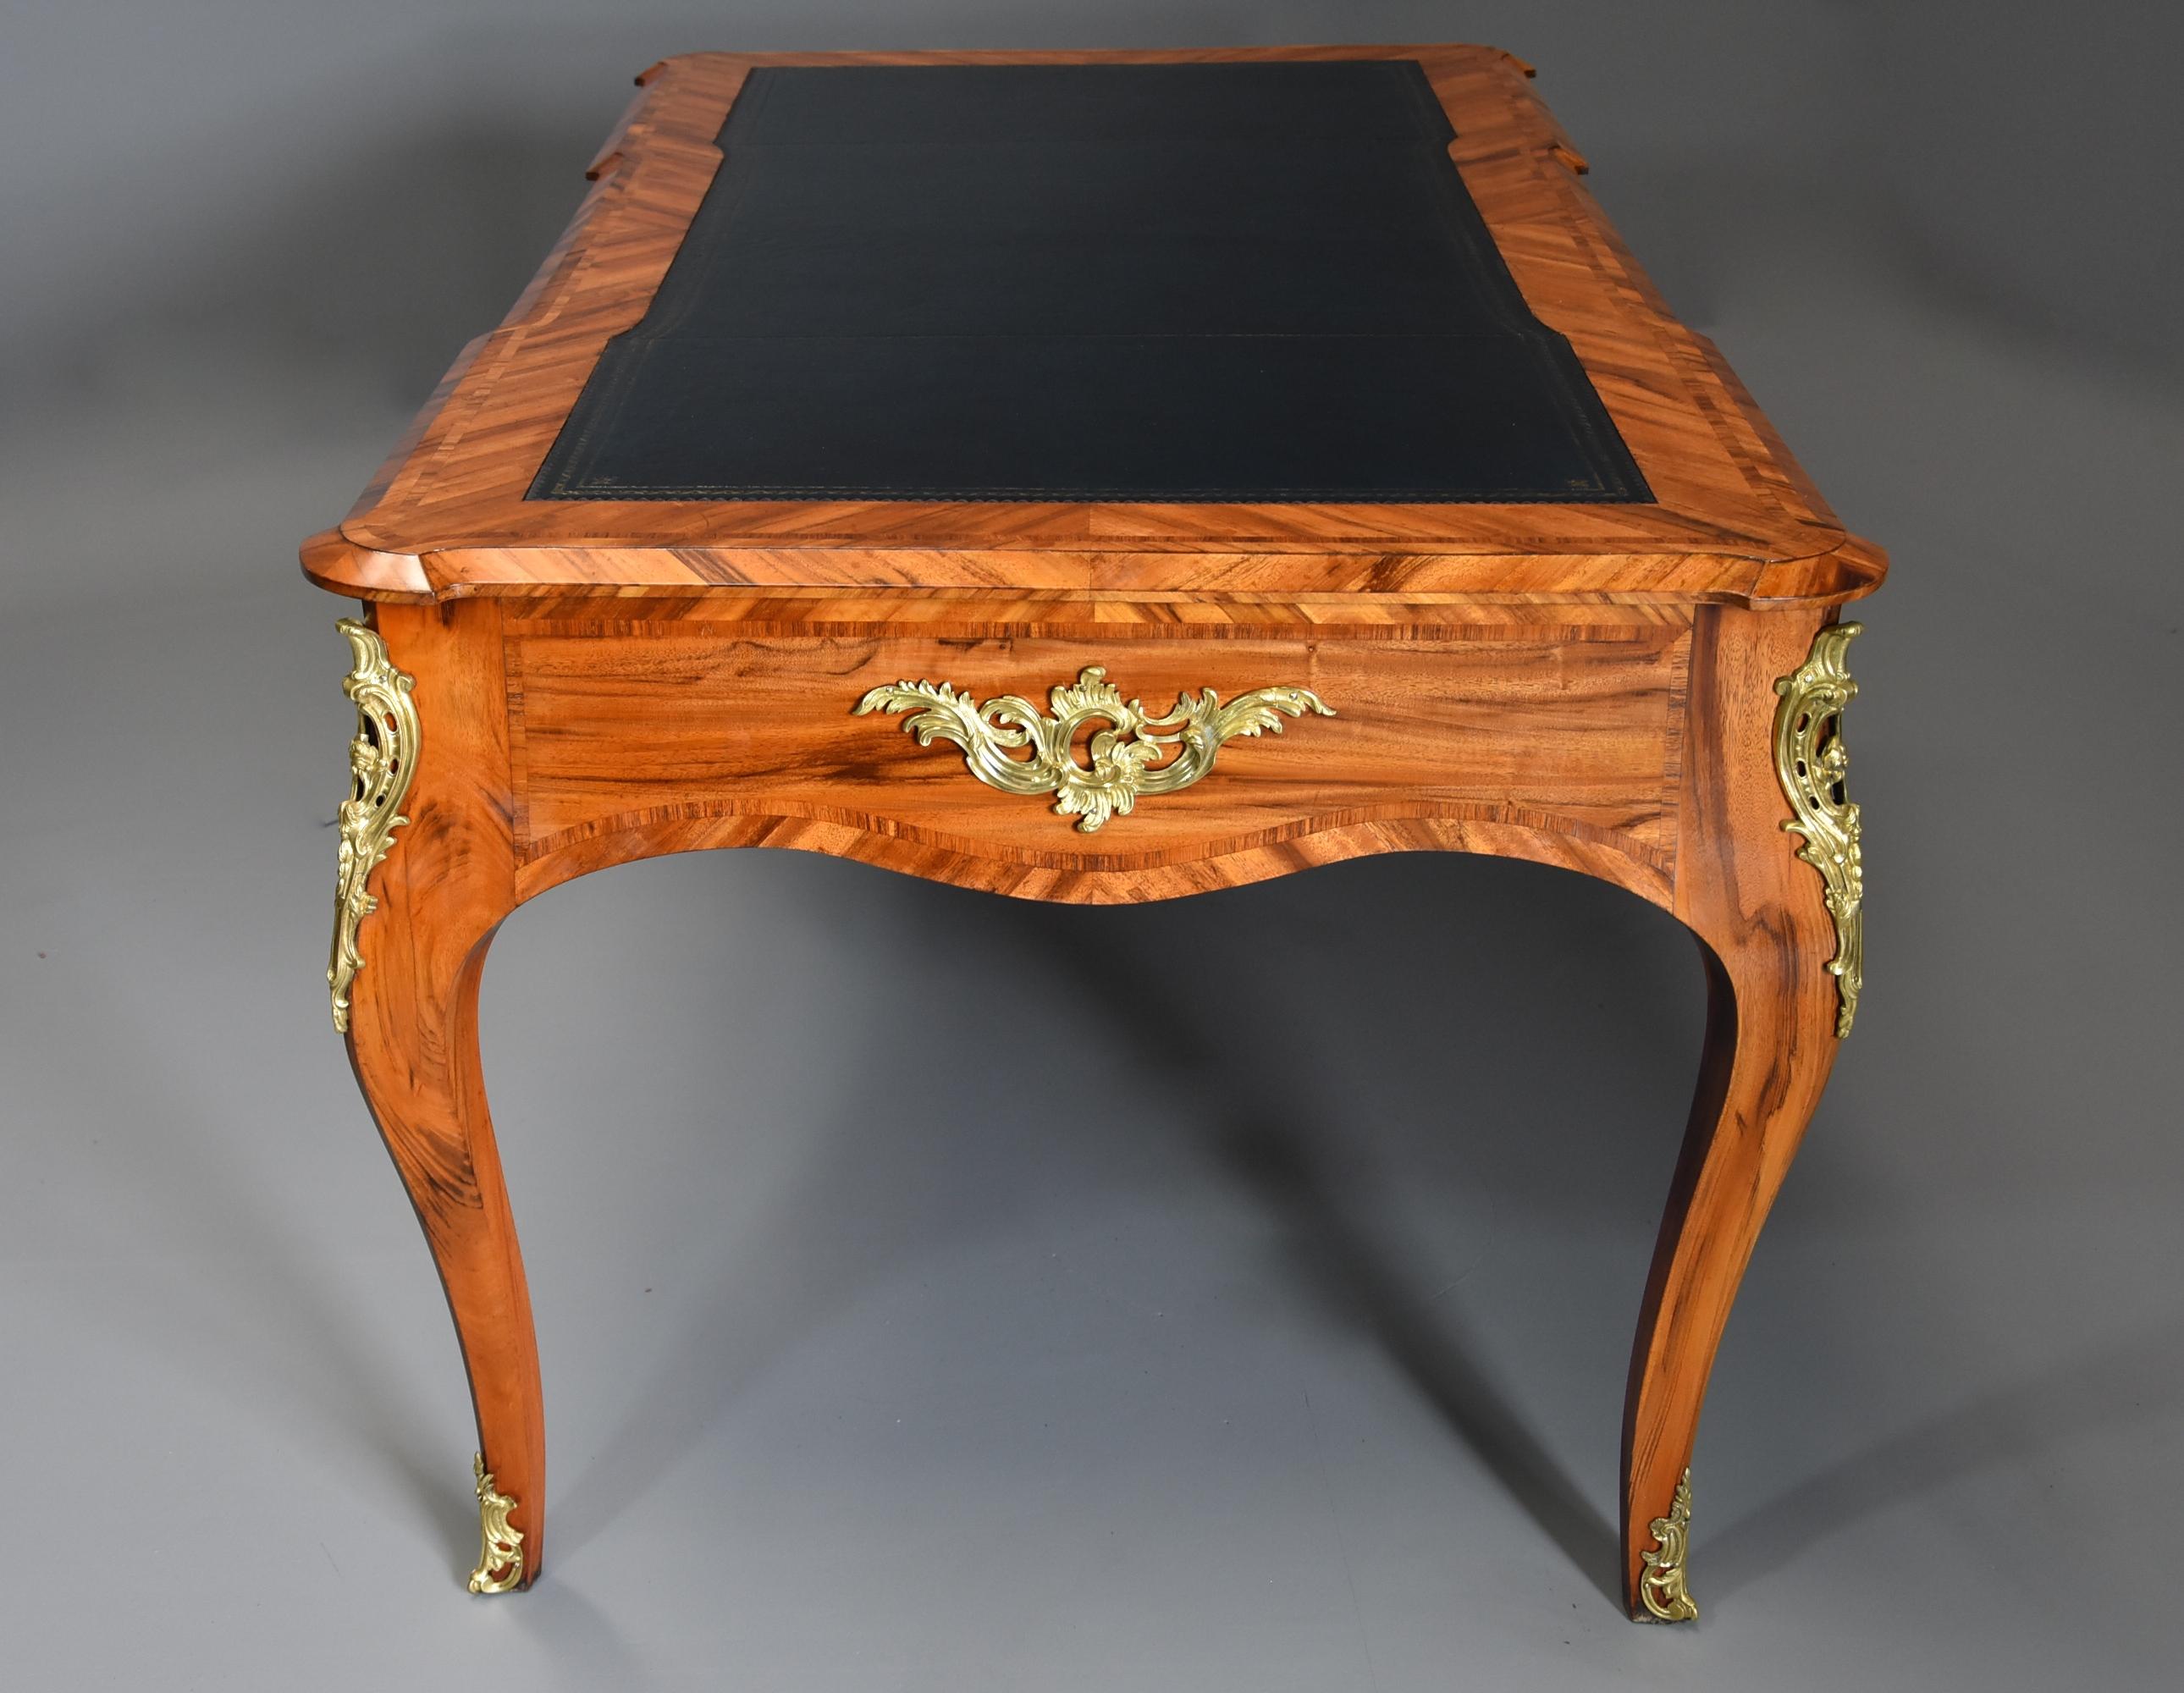 Fine Quality Mid-19th Century Goncalo Alves Bureau Plat in the French Style For Sale 4